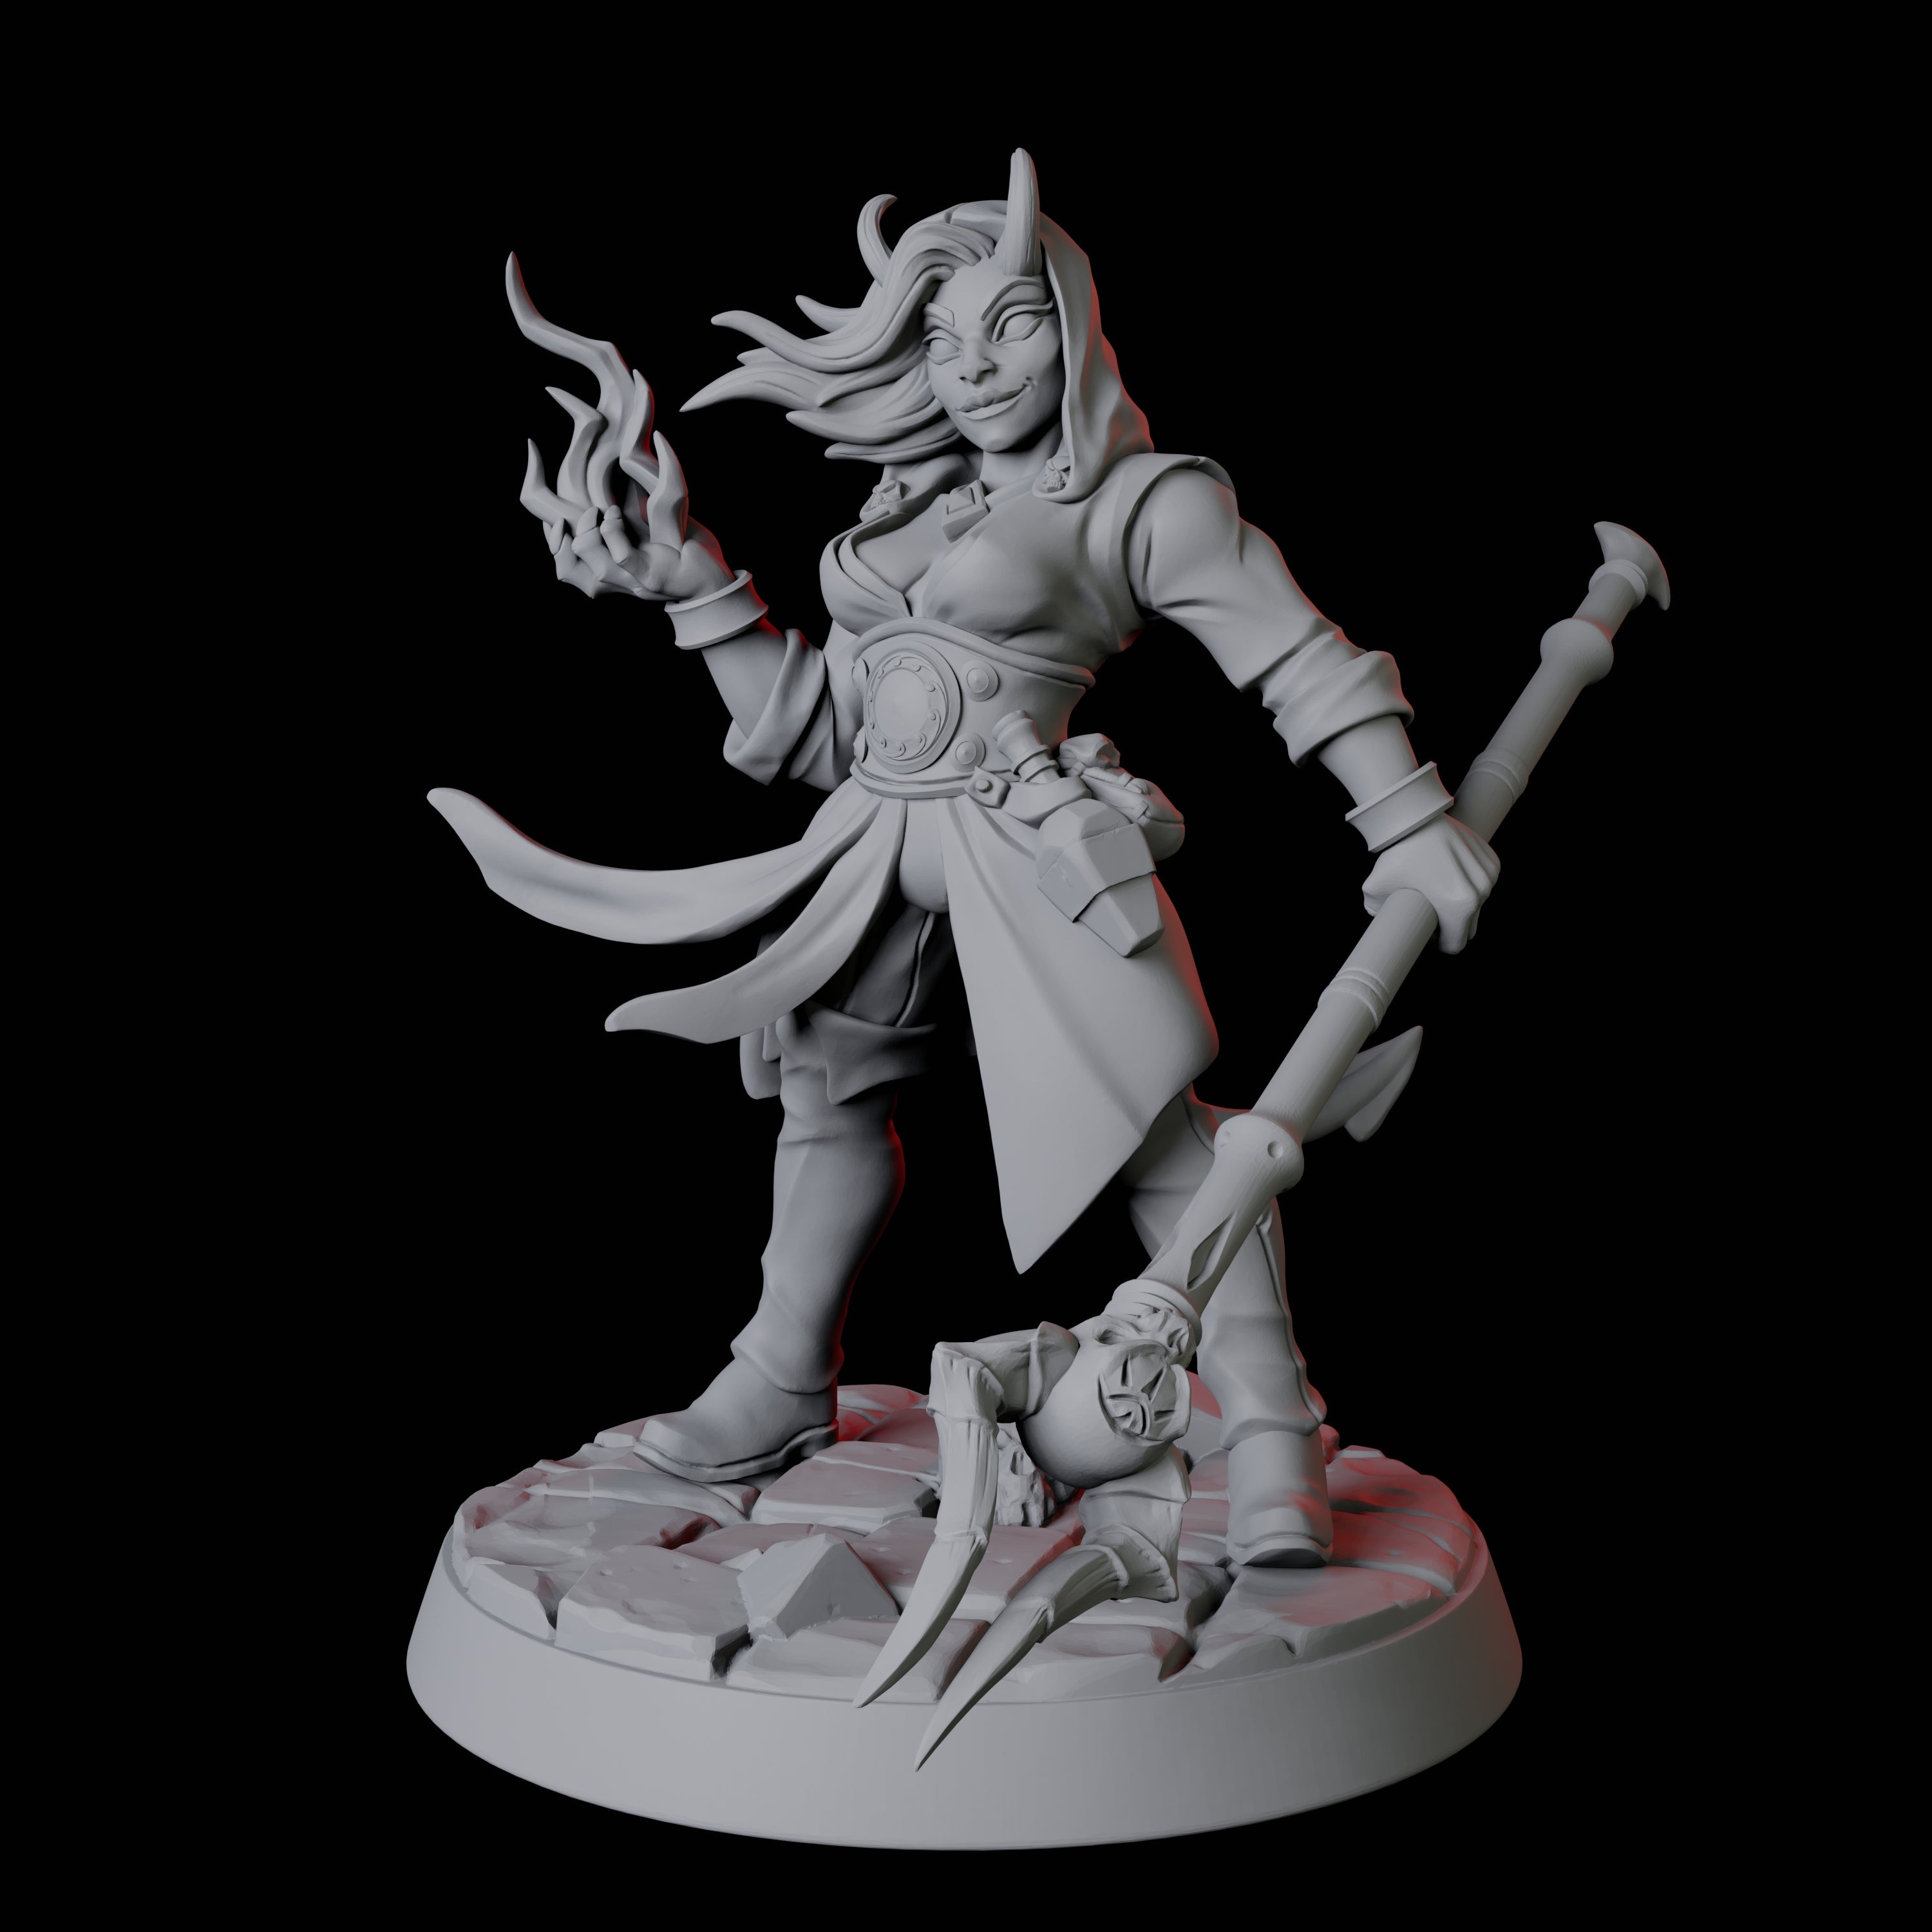 Tiefling Magic Caster E Miniature for Dungeons and Dragons, Pathfinder or other TTRPGs